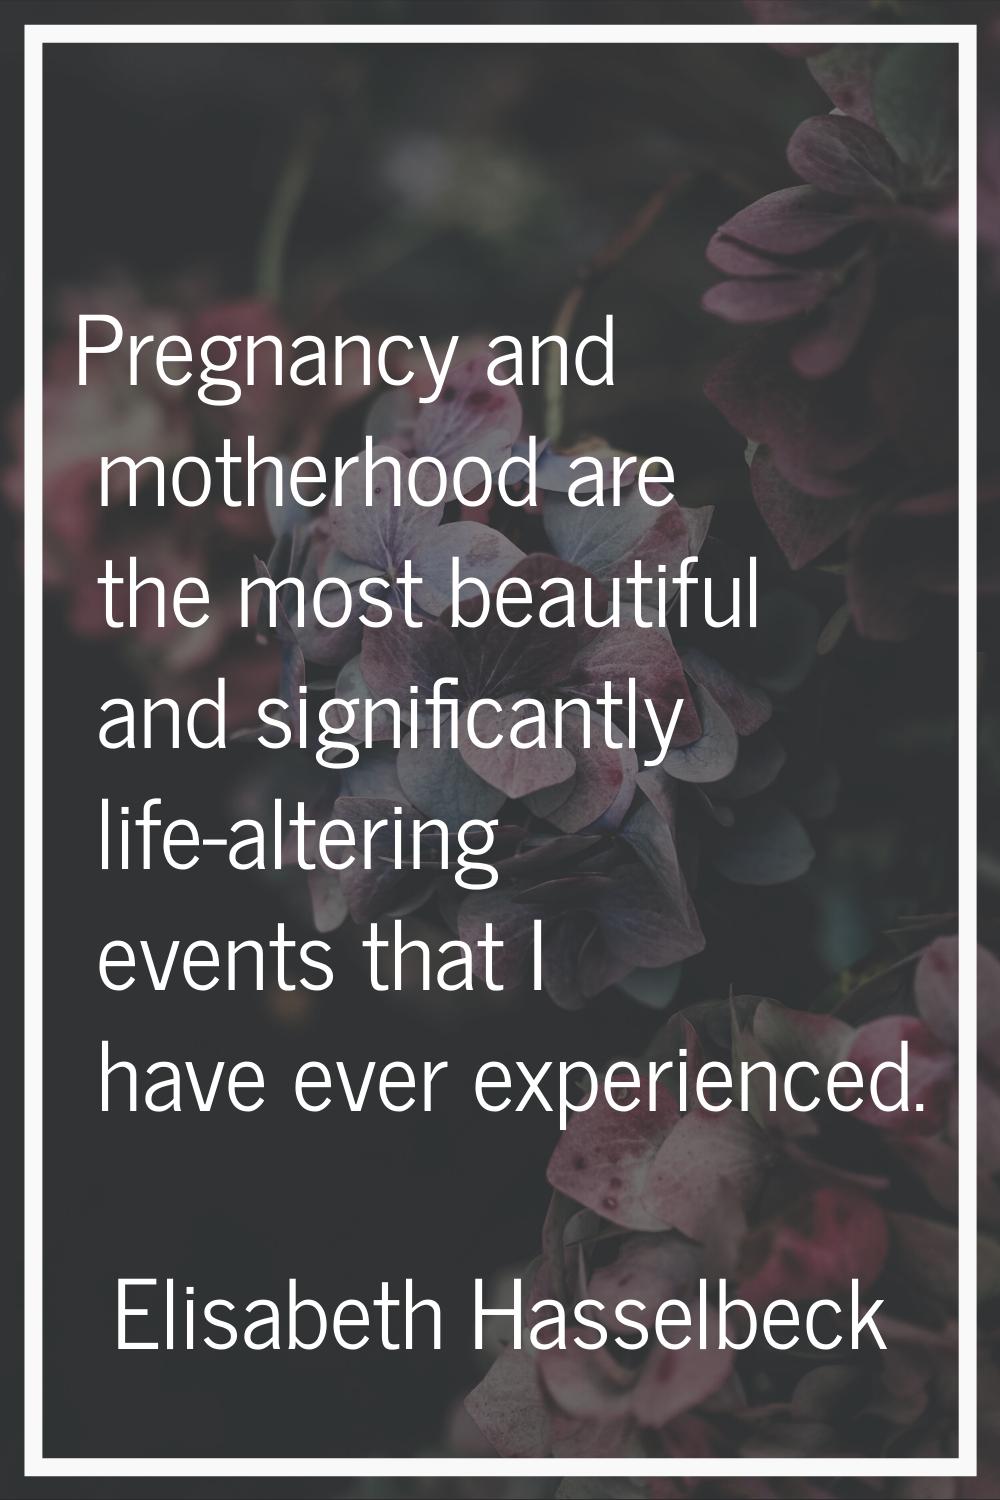 Pregnancy and motherhood are the most beautiful and significantly life-altering events that I have 